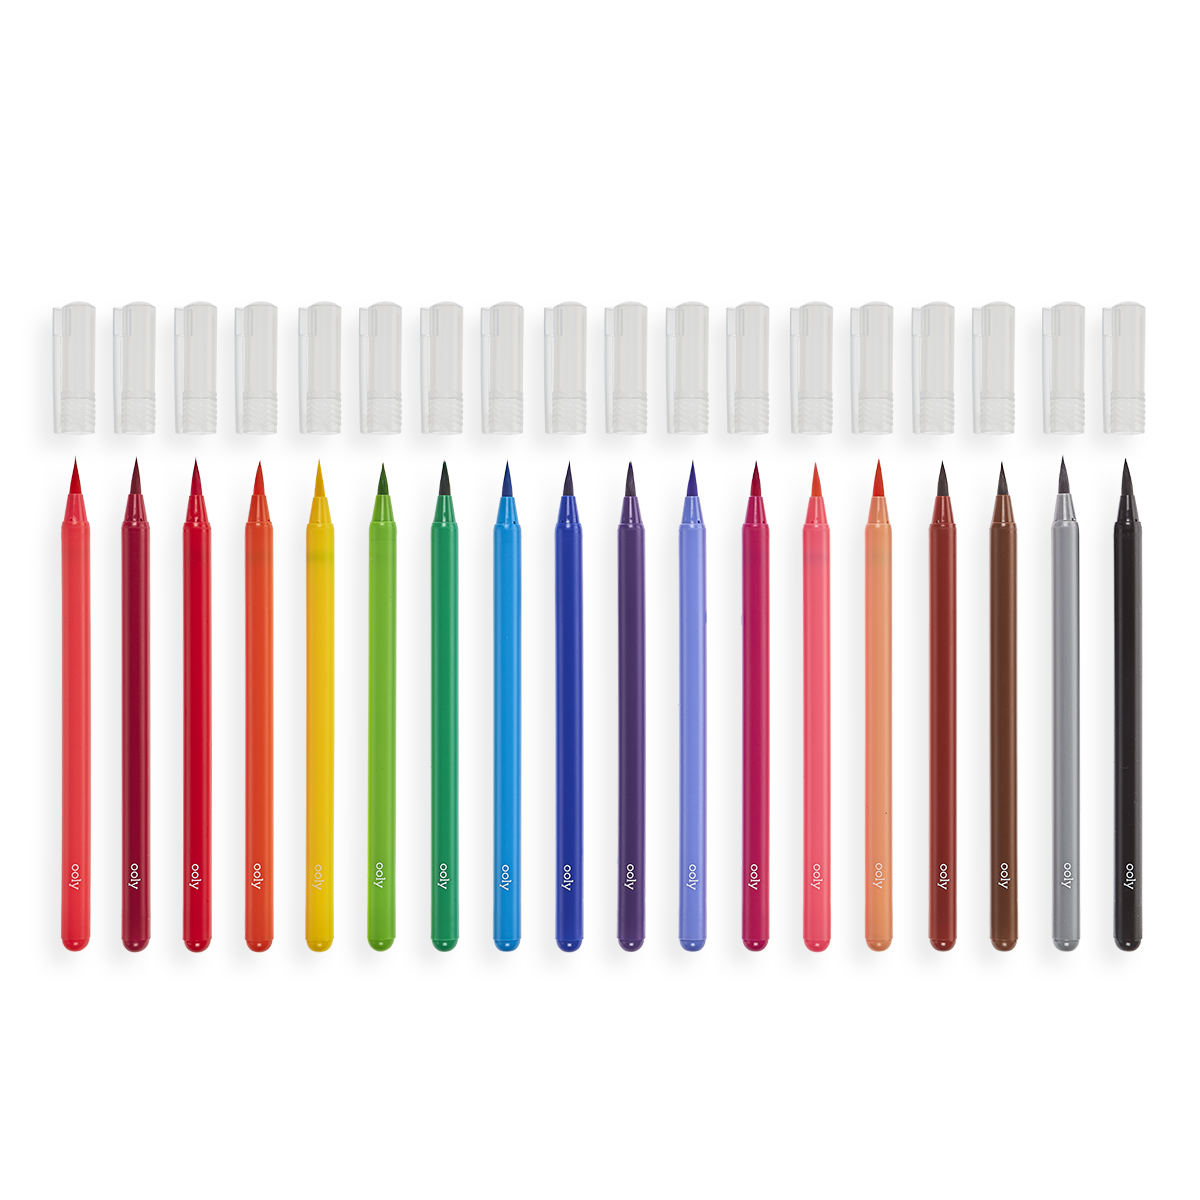 Chroma Blends Watercolor Brush Markers lined up in a row with caps off